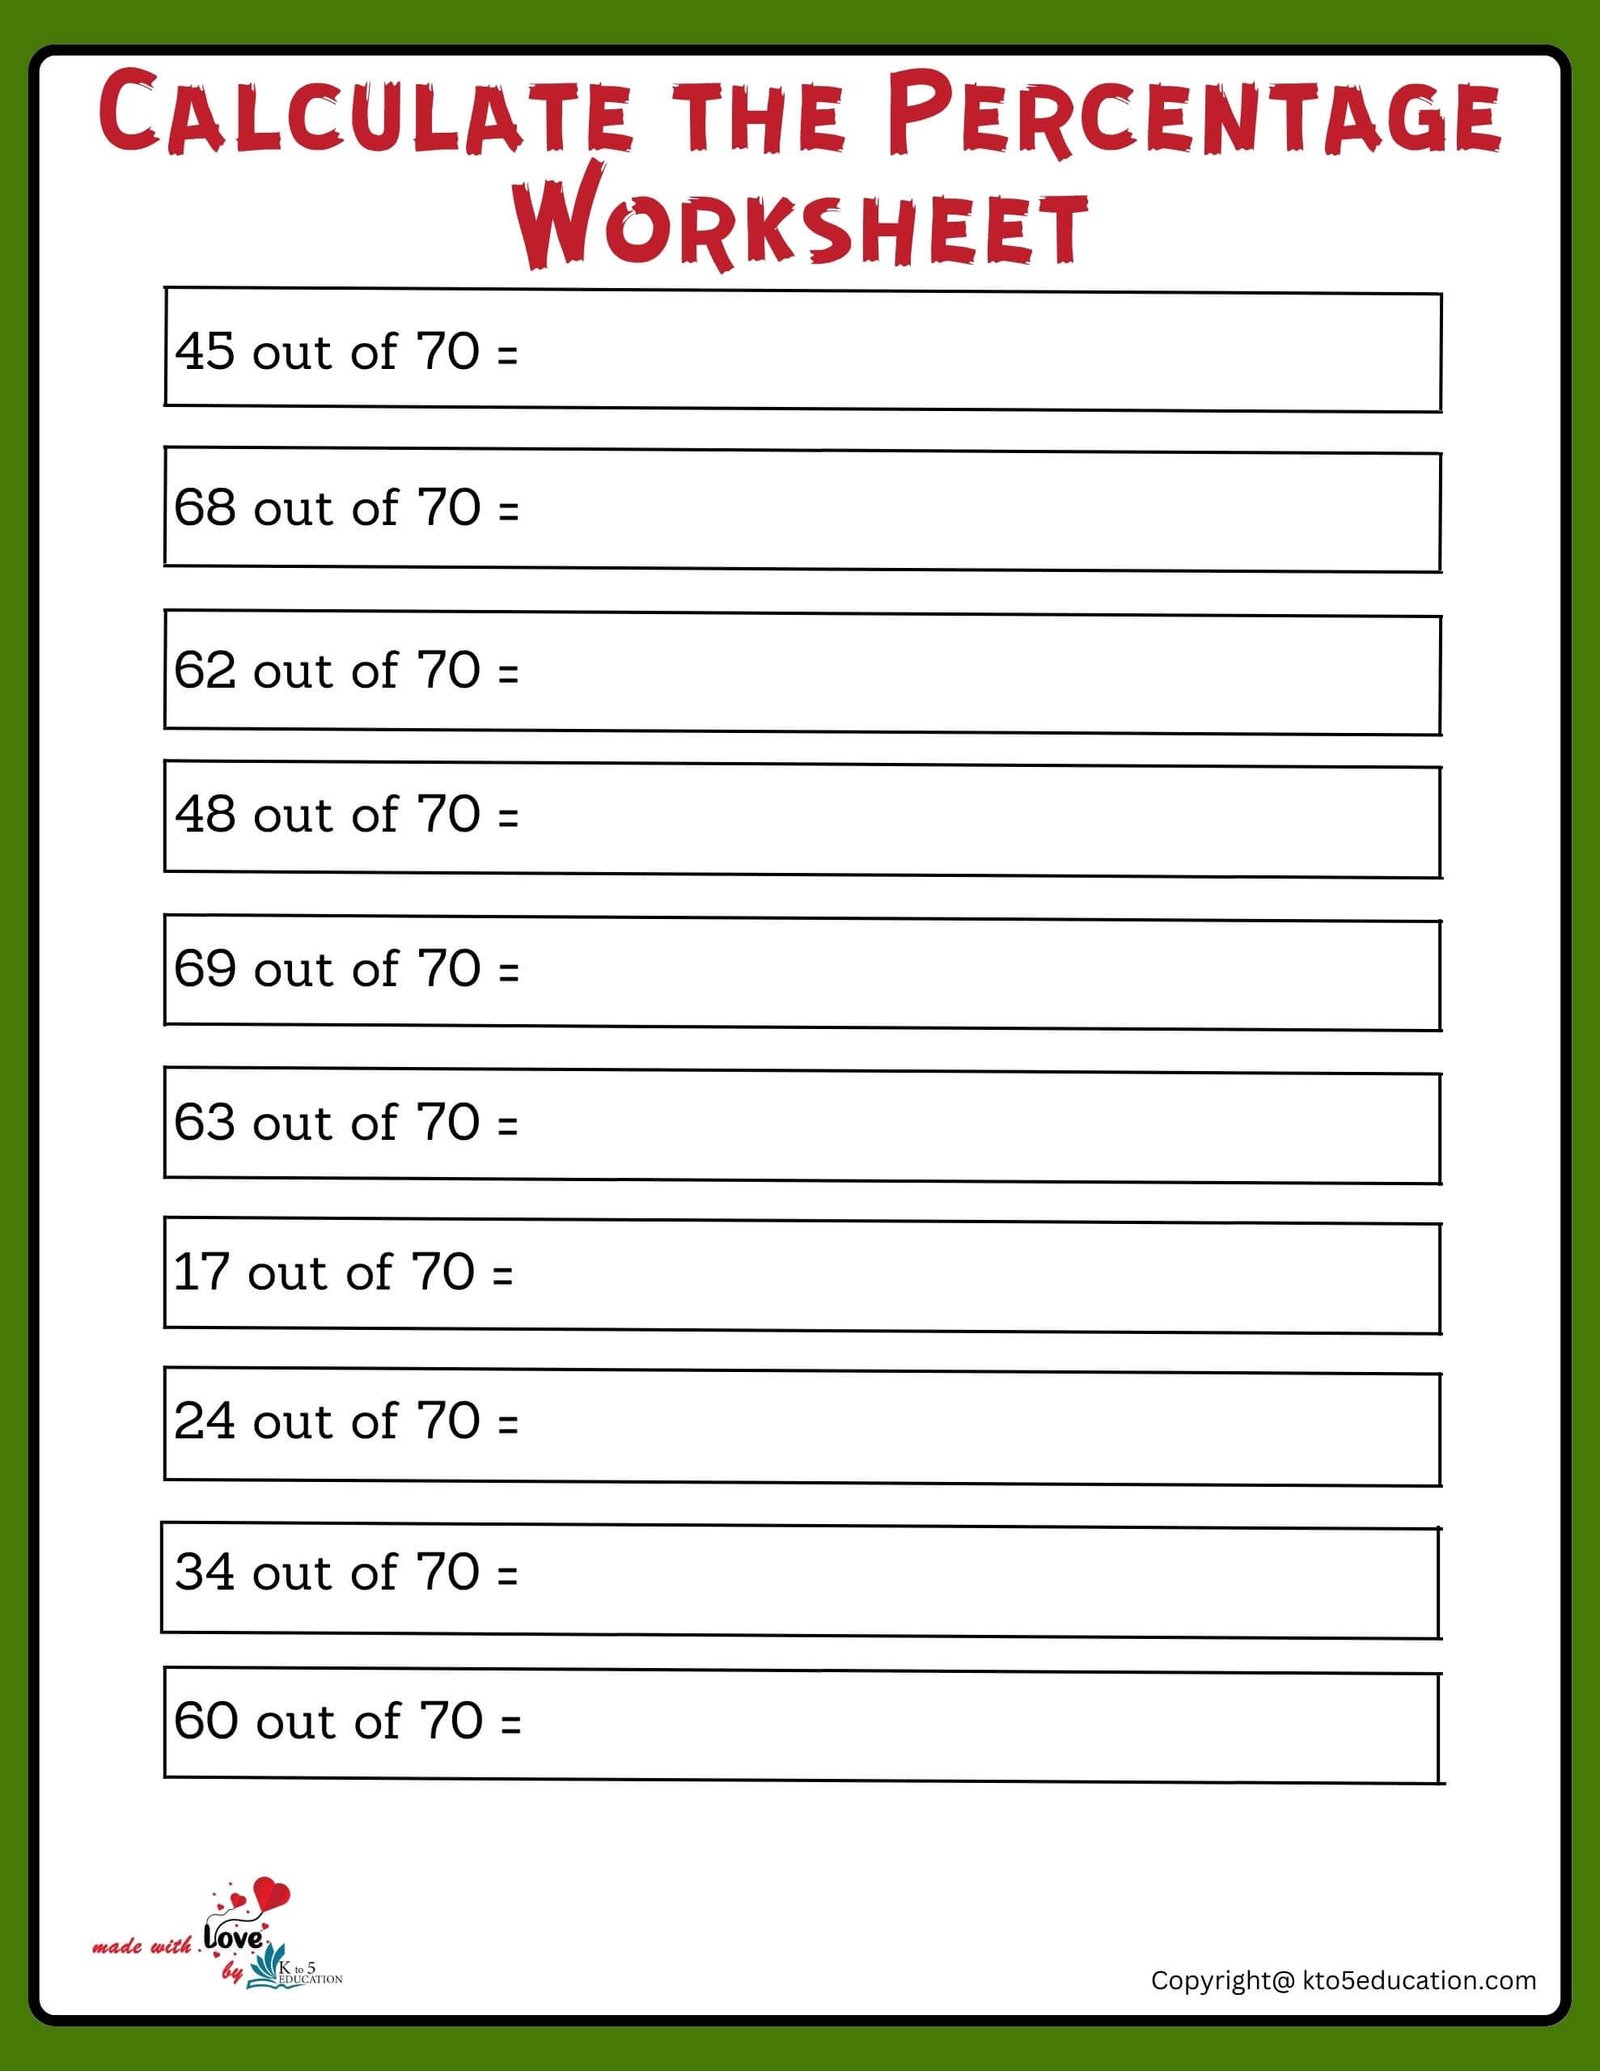 Calculate With 70 Percentage Worksheet